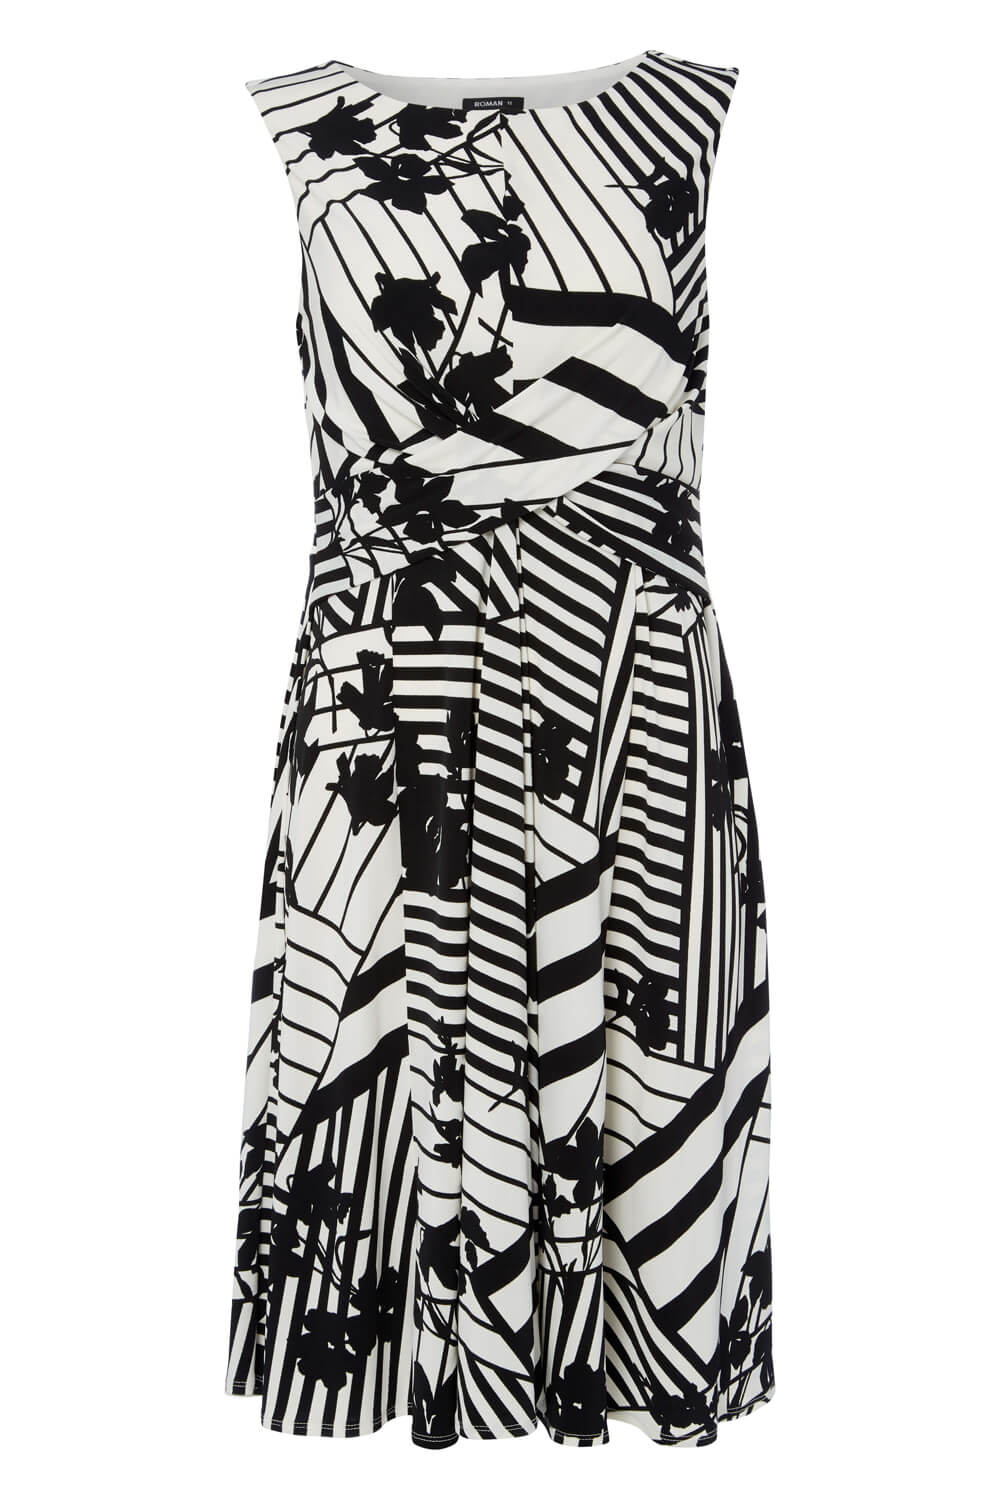 Black Monochrome Print Fit and Flare Dress, Image 3 of 3